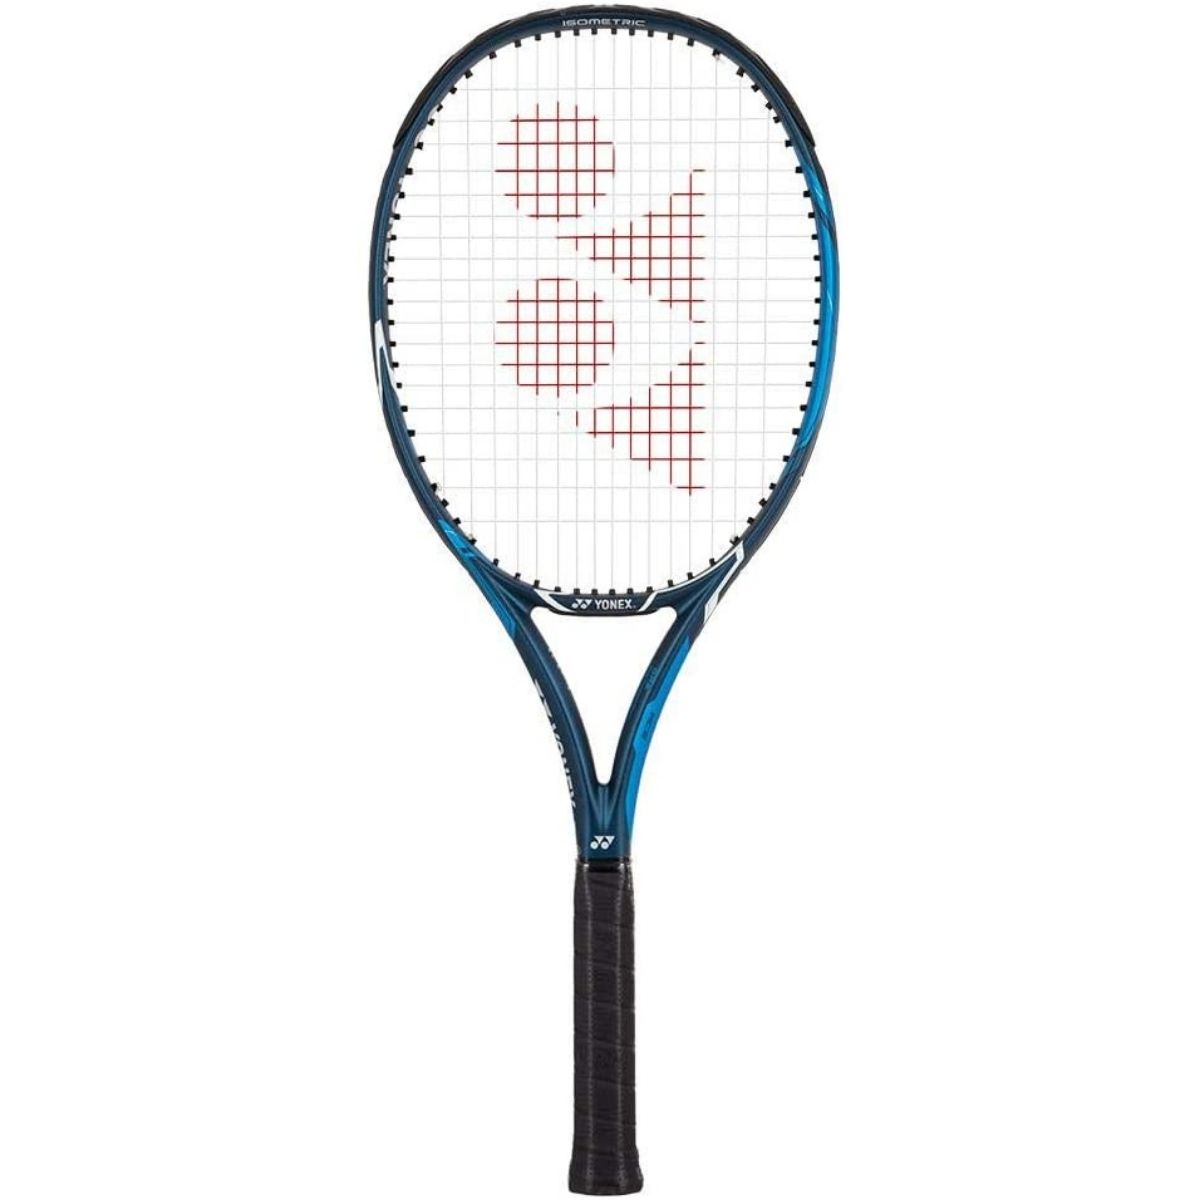 The Best Rackets for One Handed Backhand Options: Yonex EZONE Ace